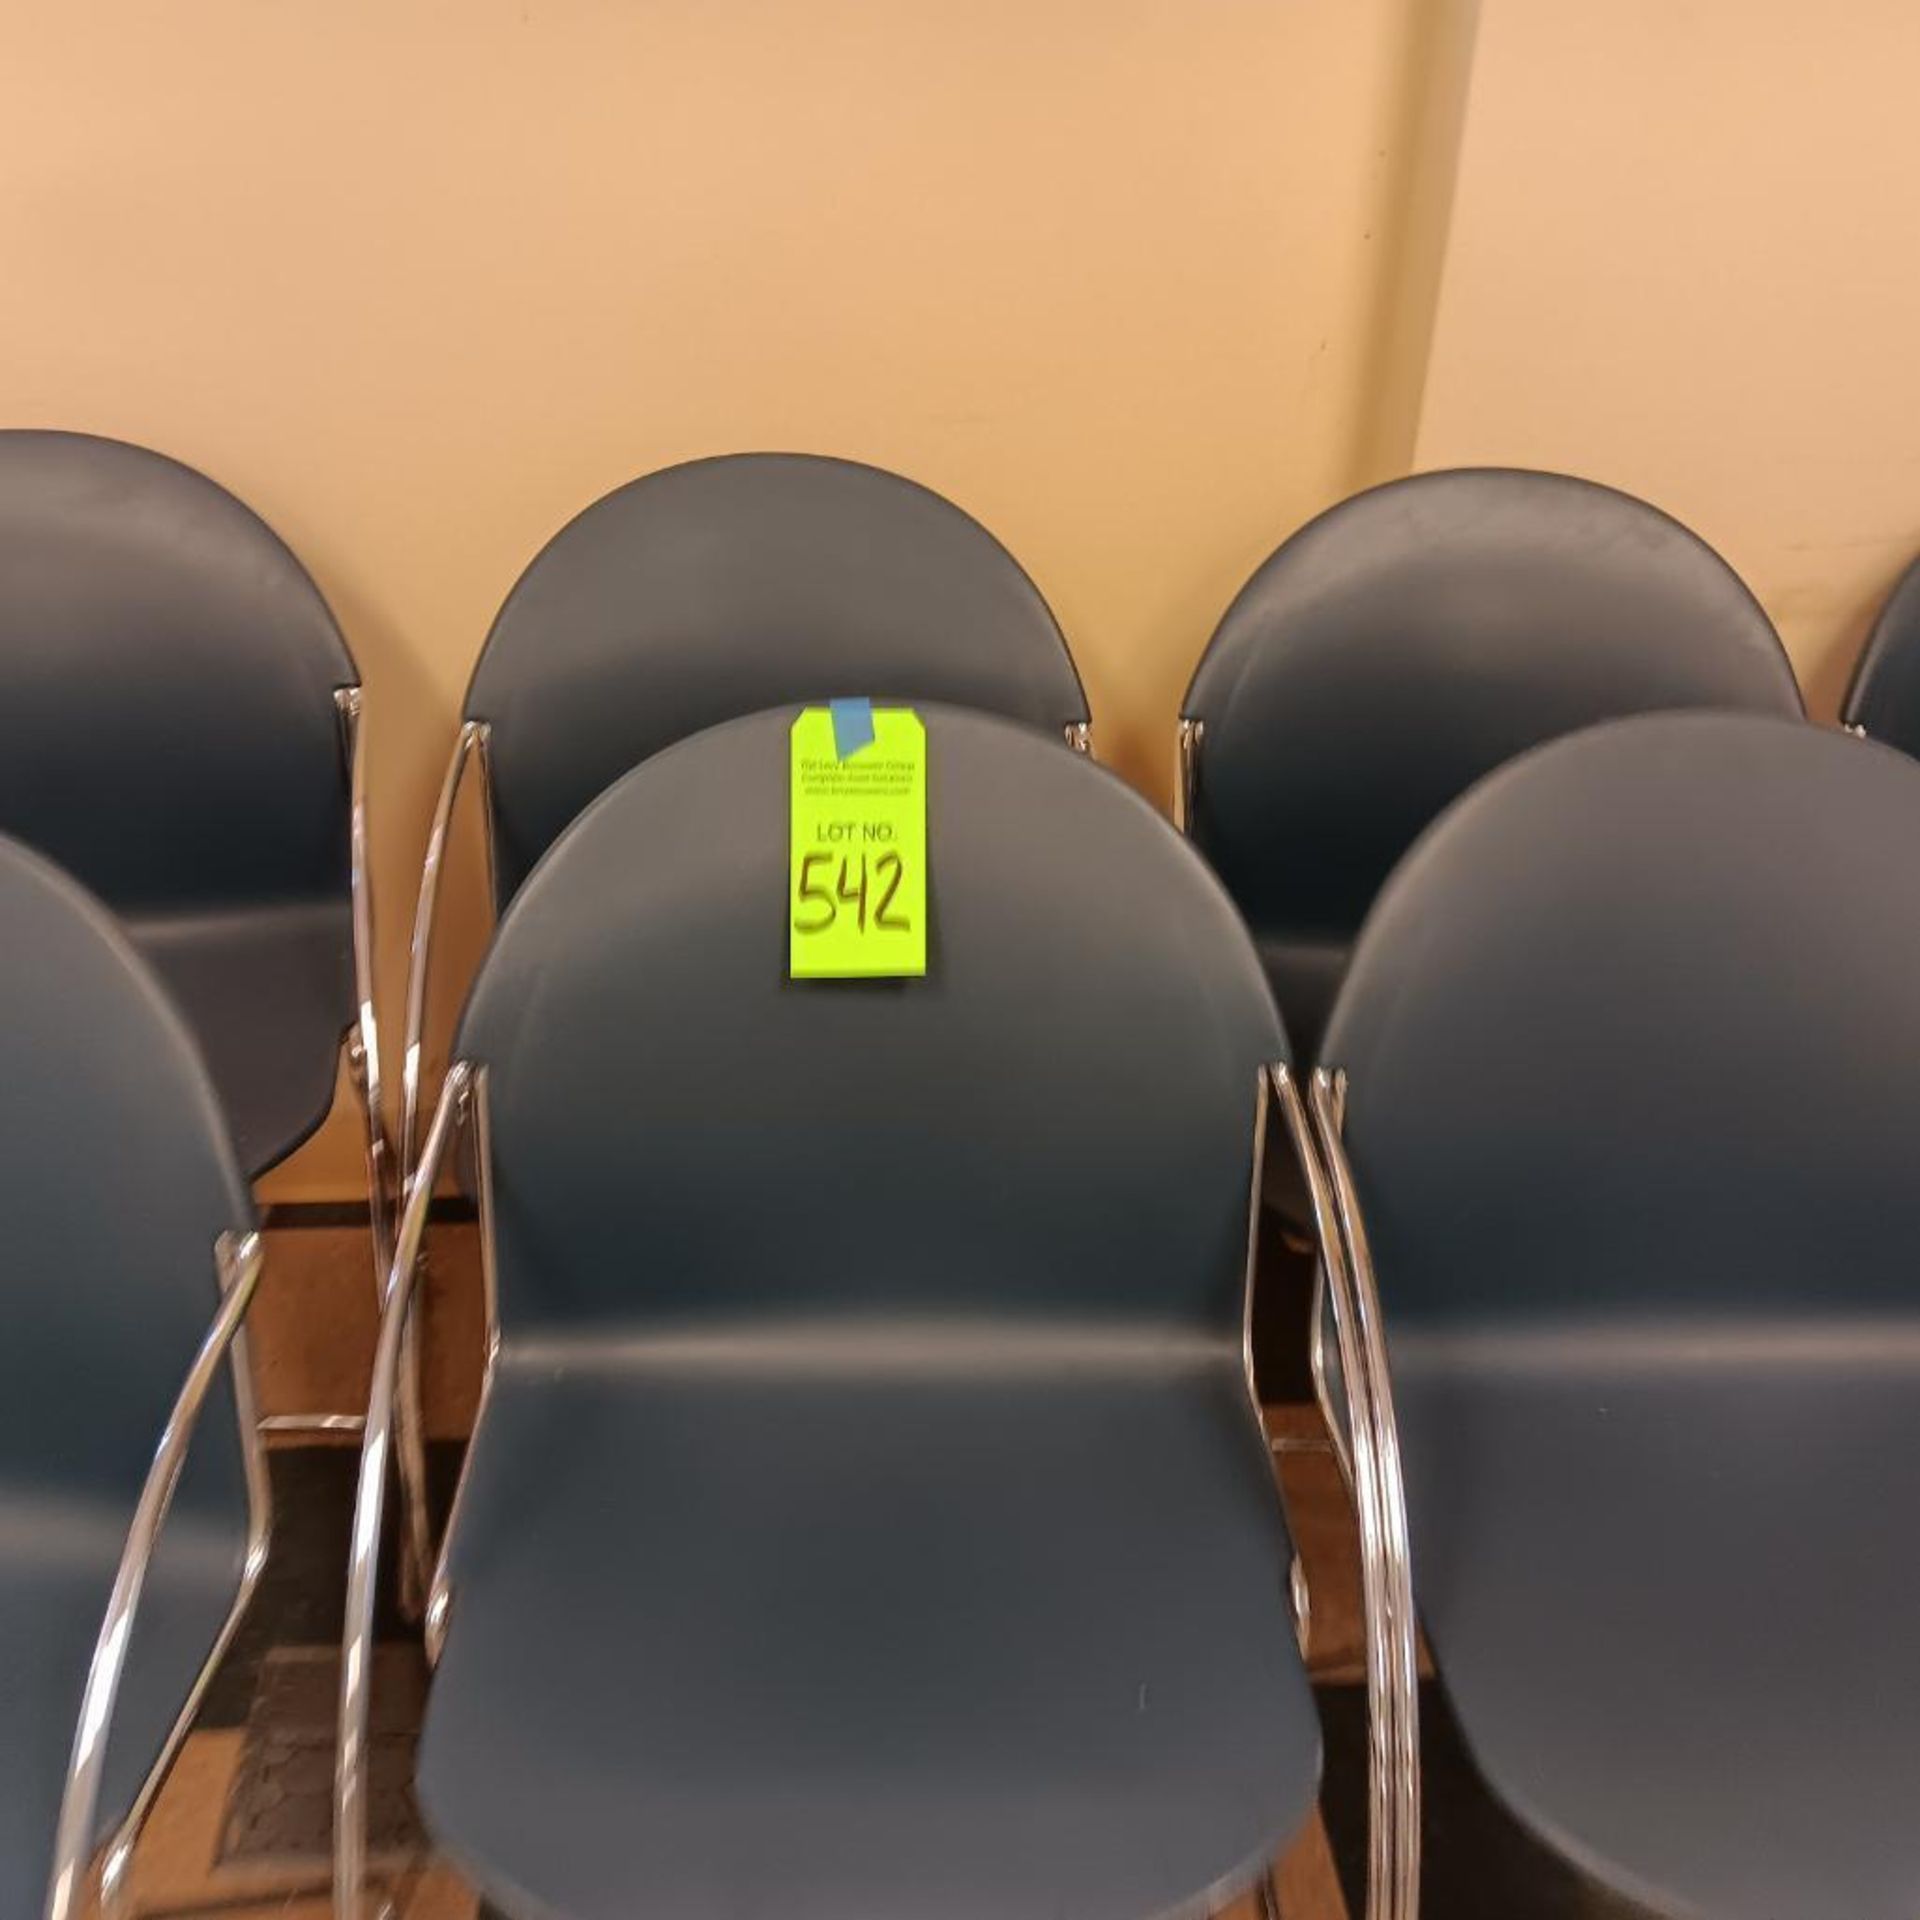 Lot of 10 Chairs - Image 2 of 2